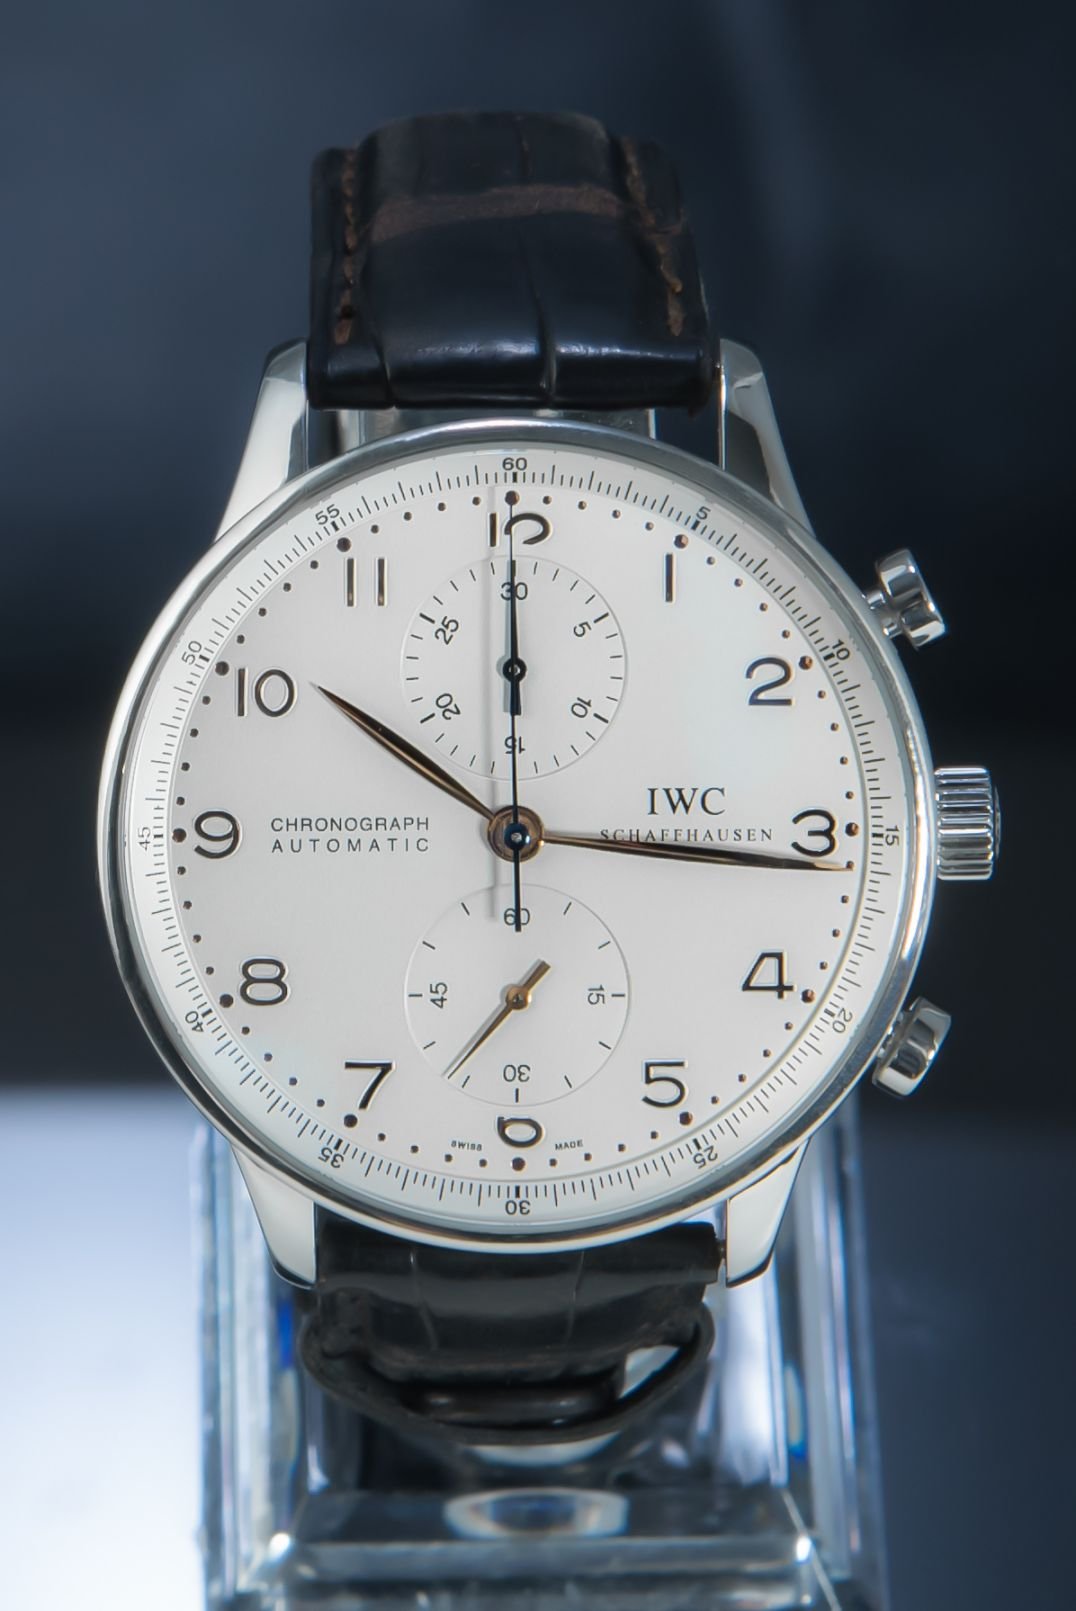 IWC Portugieser 41 Chronograph Auto TOP Condition - 371445 - Pawndeluxe ...